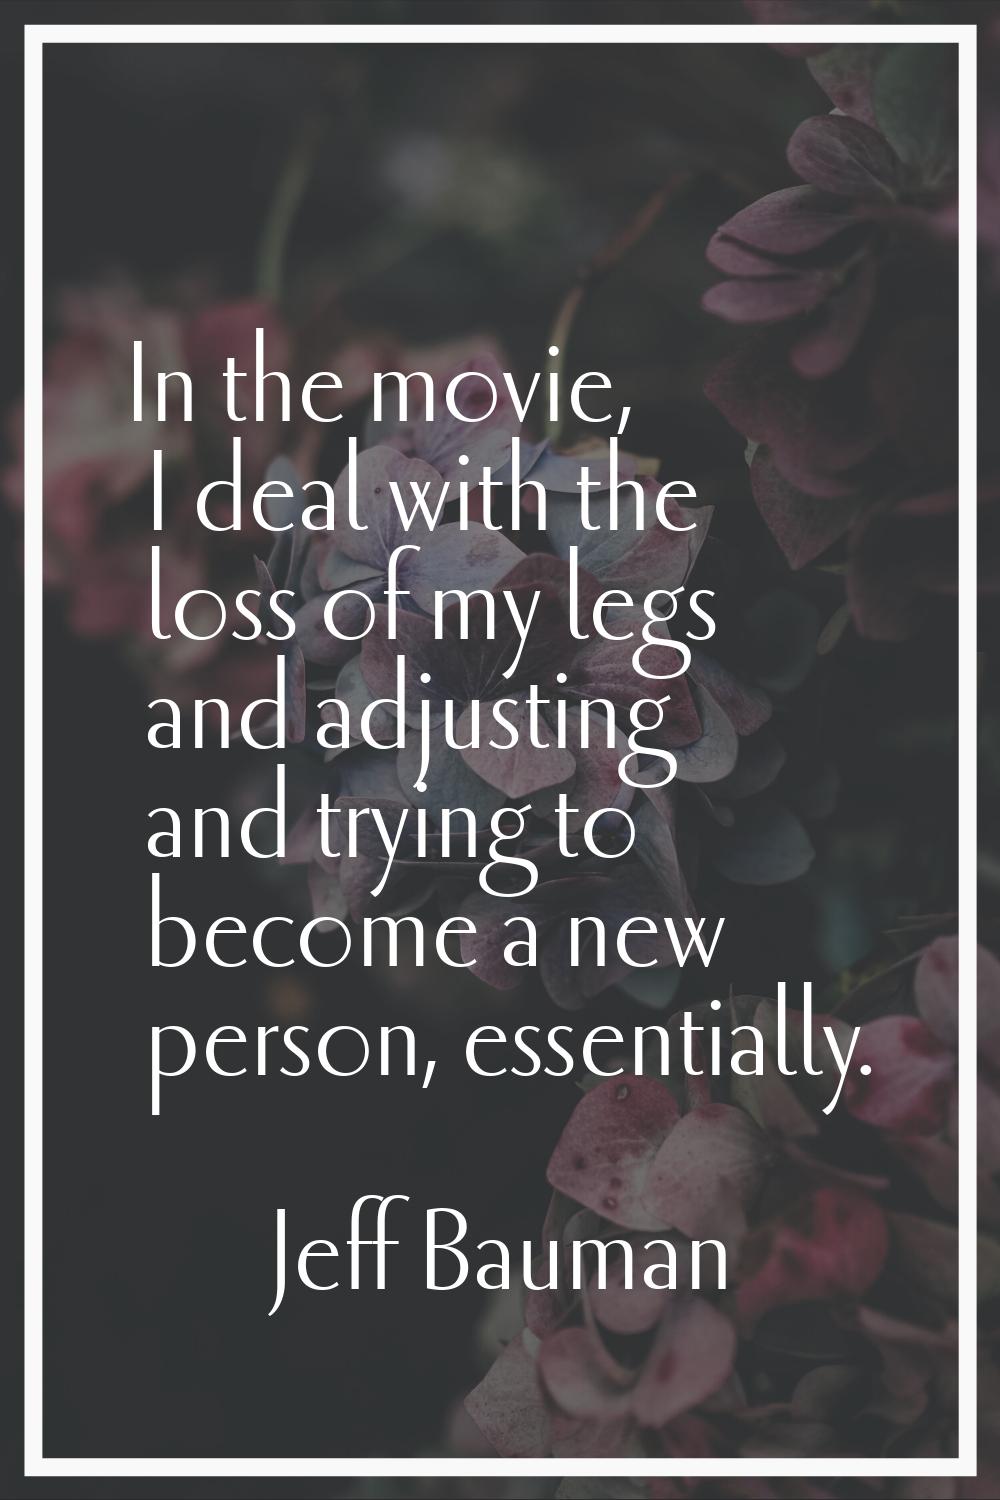 In the movie, I deal with the loss of my legs and adjusting and trying to become a new person, esse